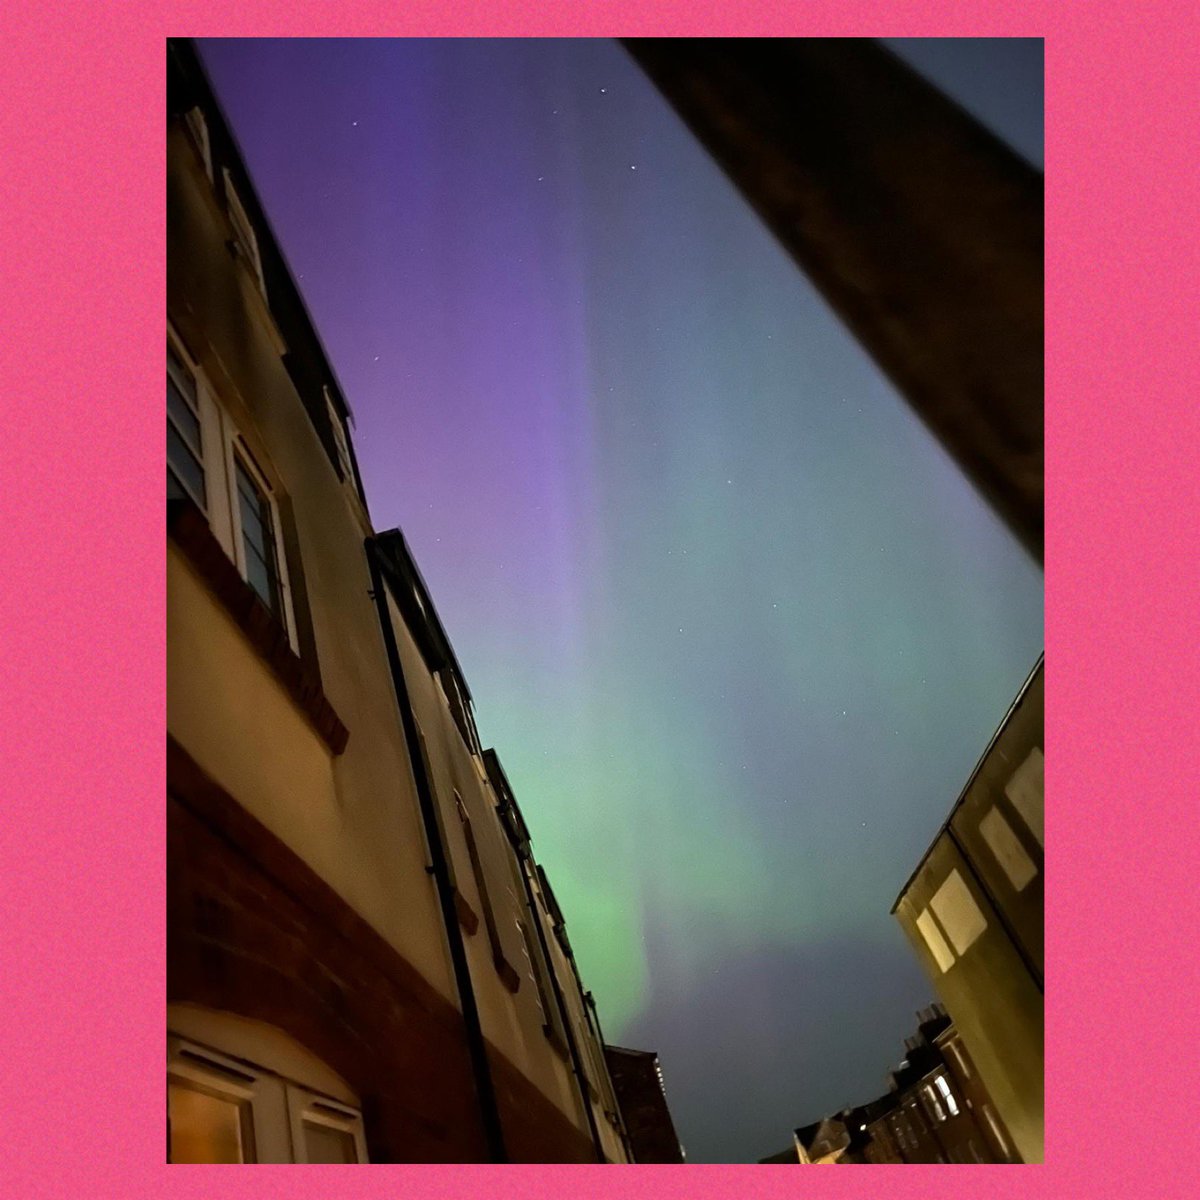 S lives in a dispersed flat in #Scarborough, part of our Young People’s Pathway. This last weekend she took an amazing photo of the Northern Lights Aurora Borealis from her balcony; what a special moment captured on photo! #northernlights #aurora #northyorkshire